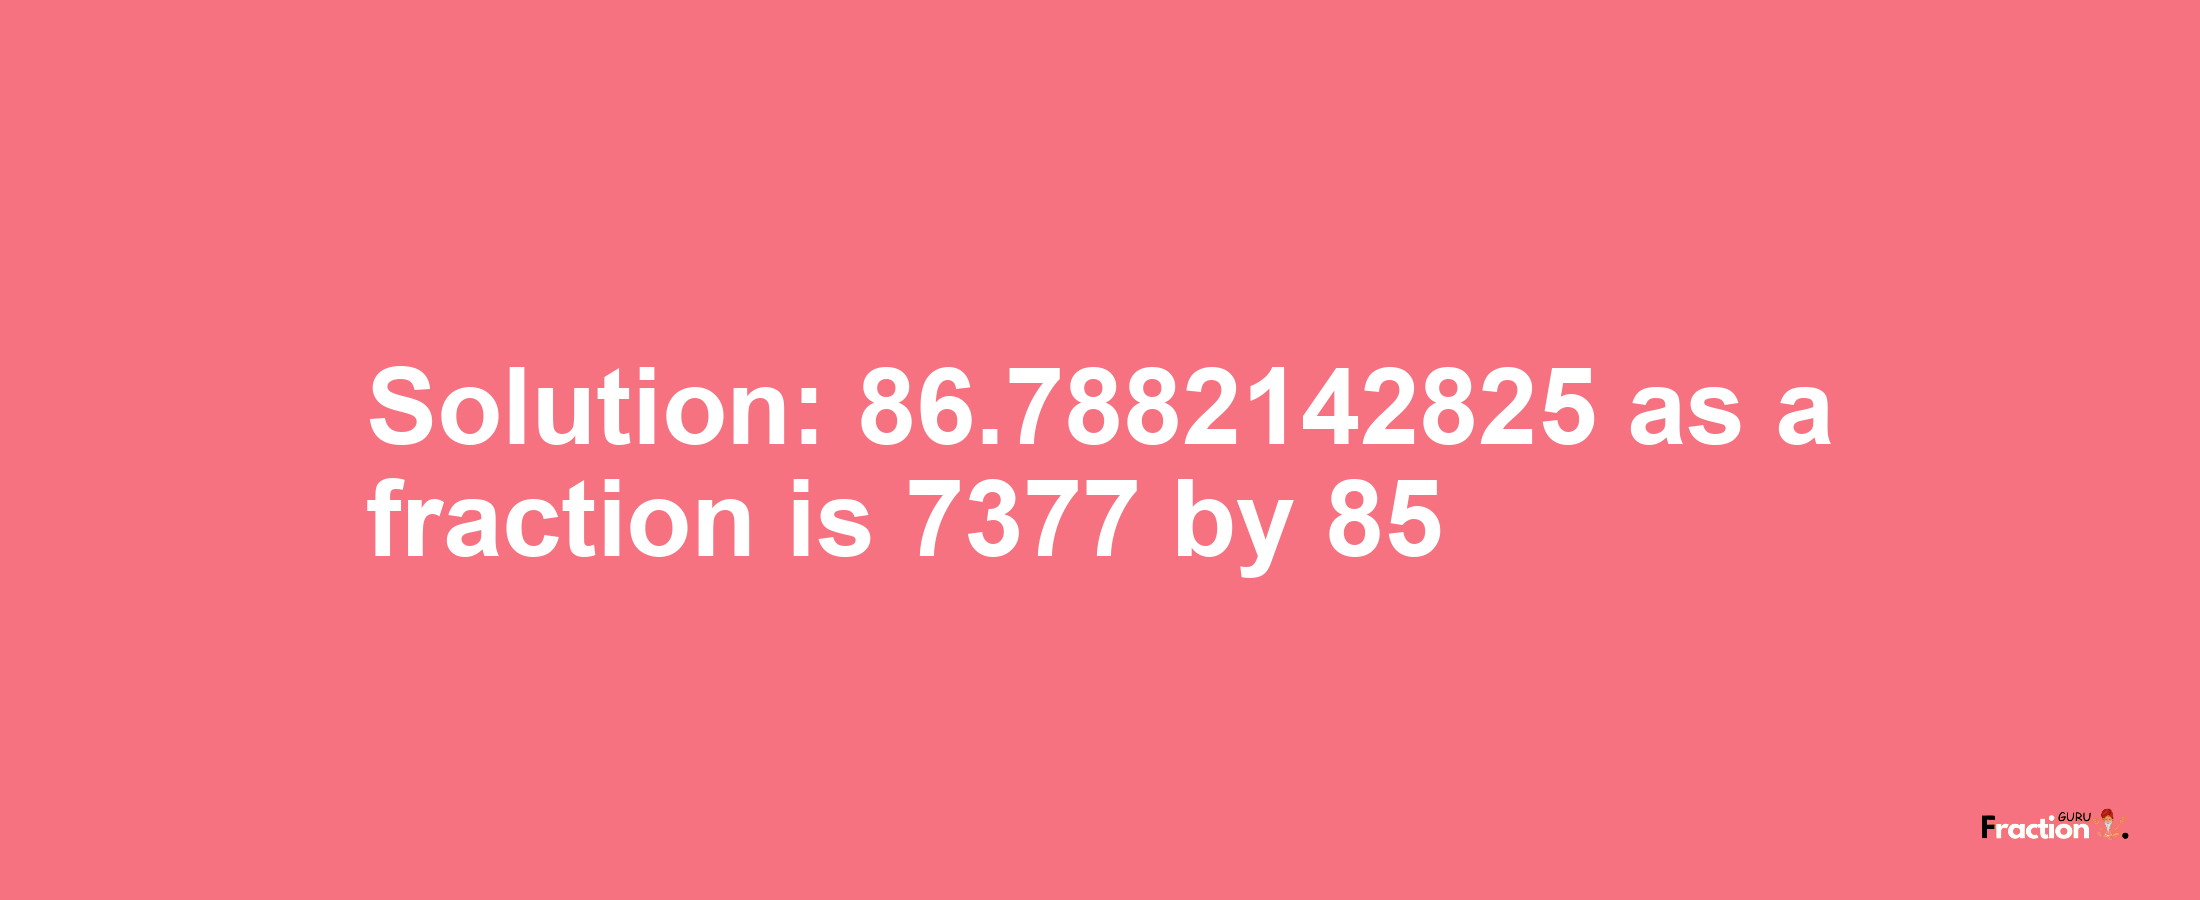 Solution:86.7882142825 as a fraction is 7377/85